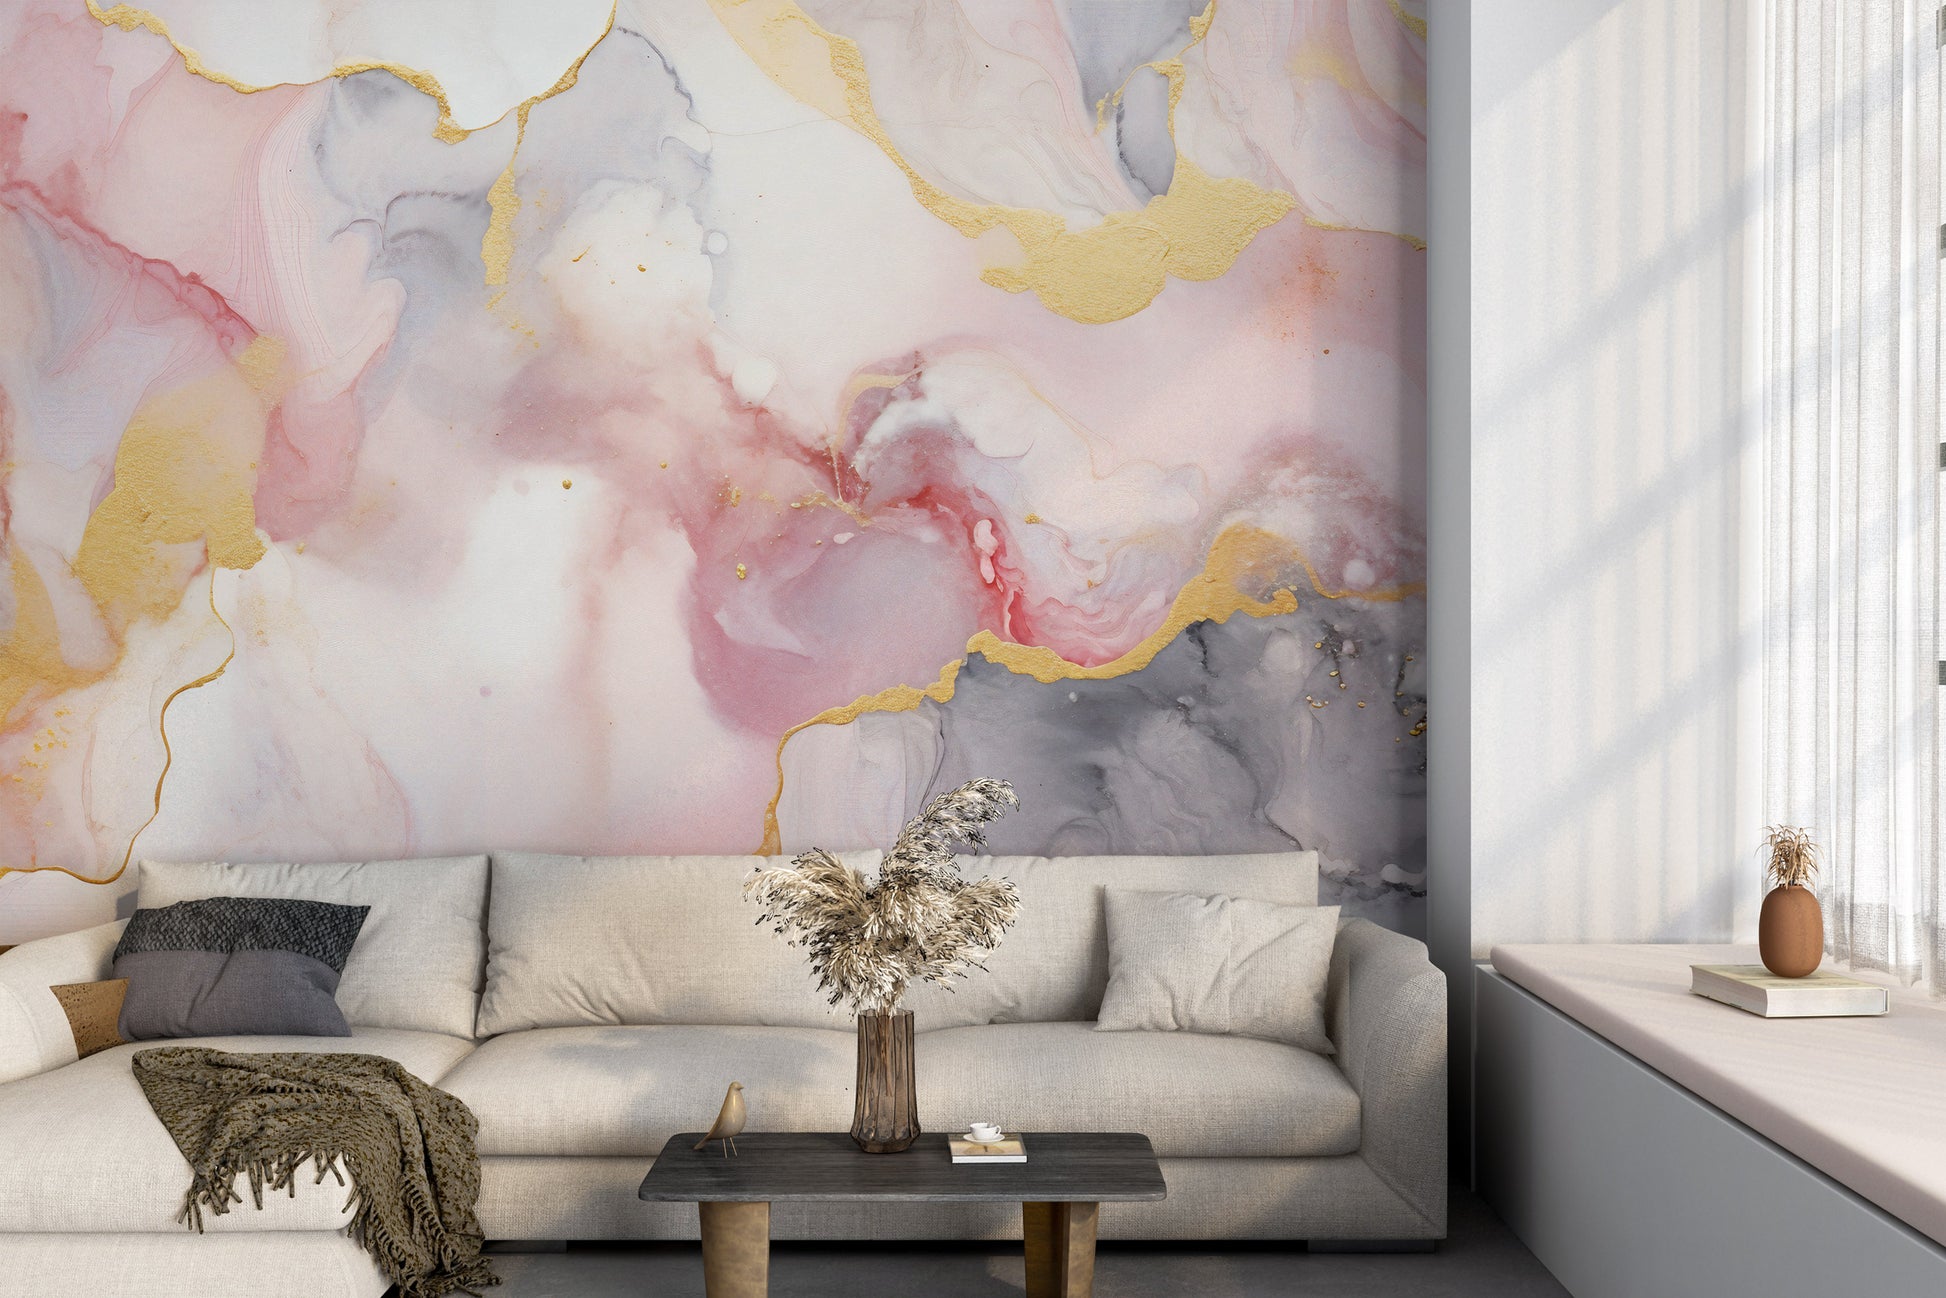 Vibrant Marble Patterned Mural